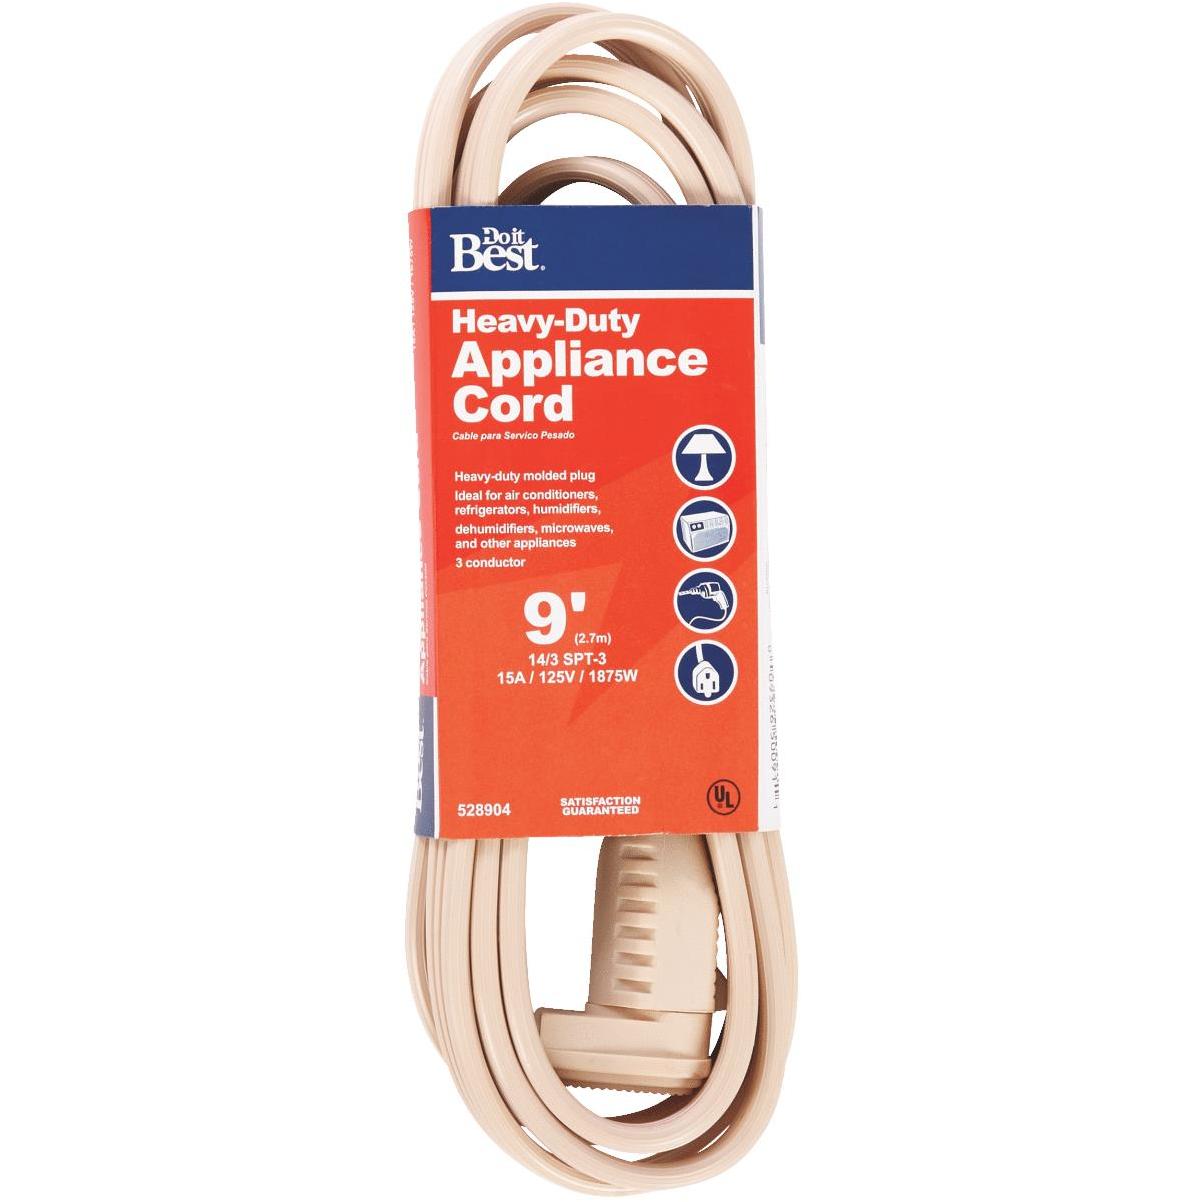 Air Conditioner/Major Appliance Extension Cord 6-foot 15A/125V BRAND NEW 